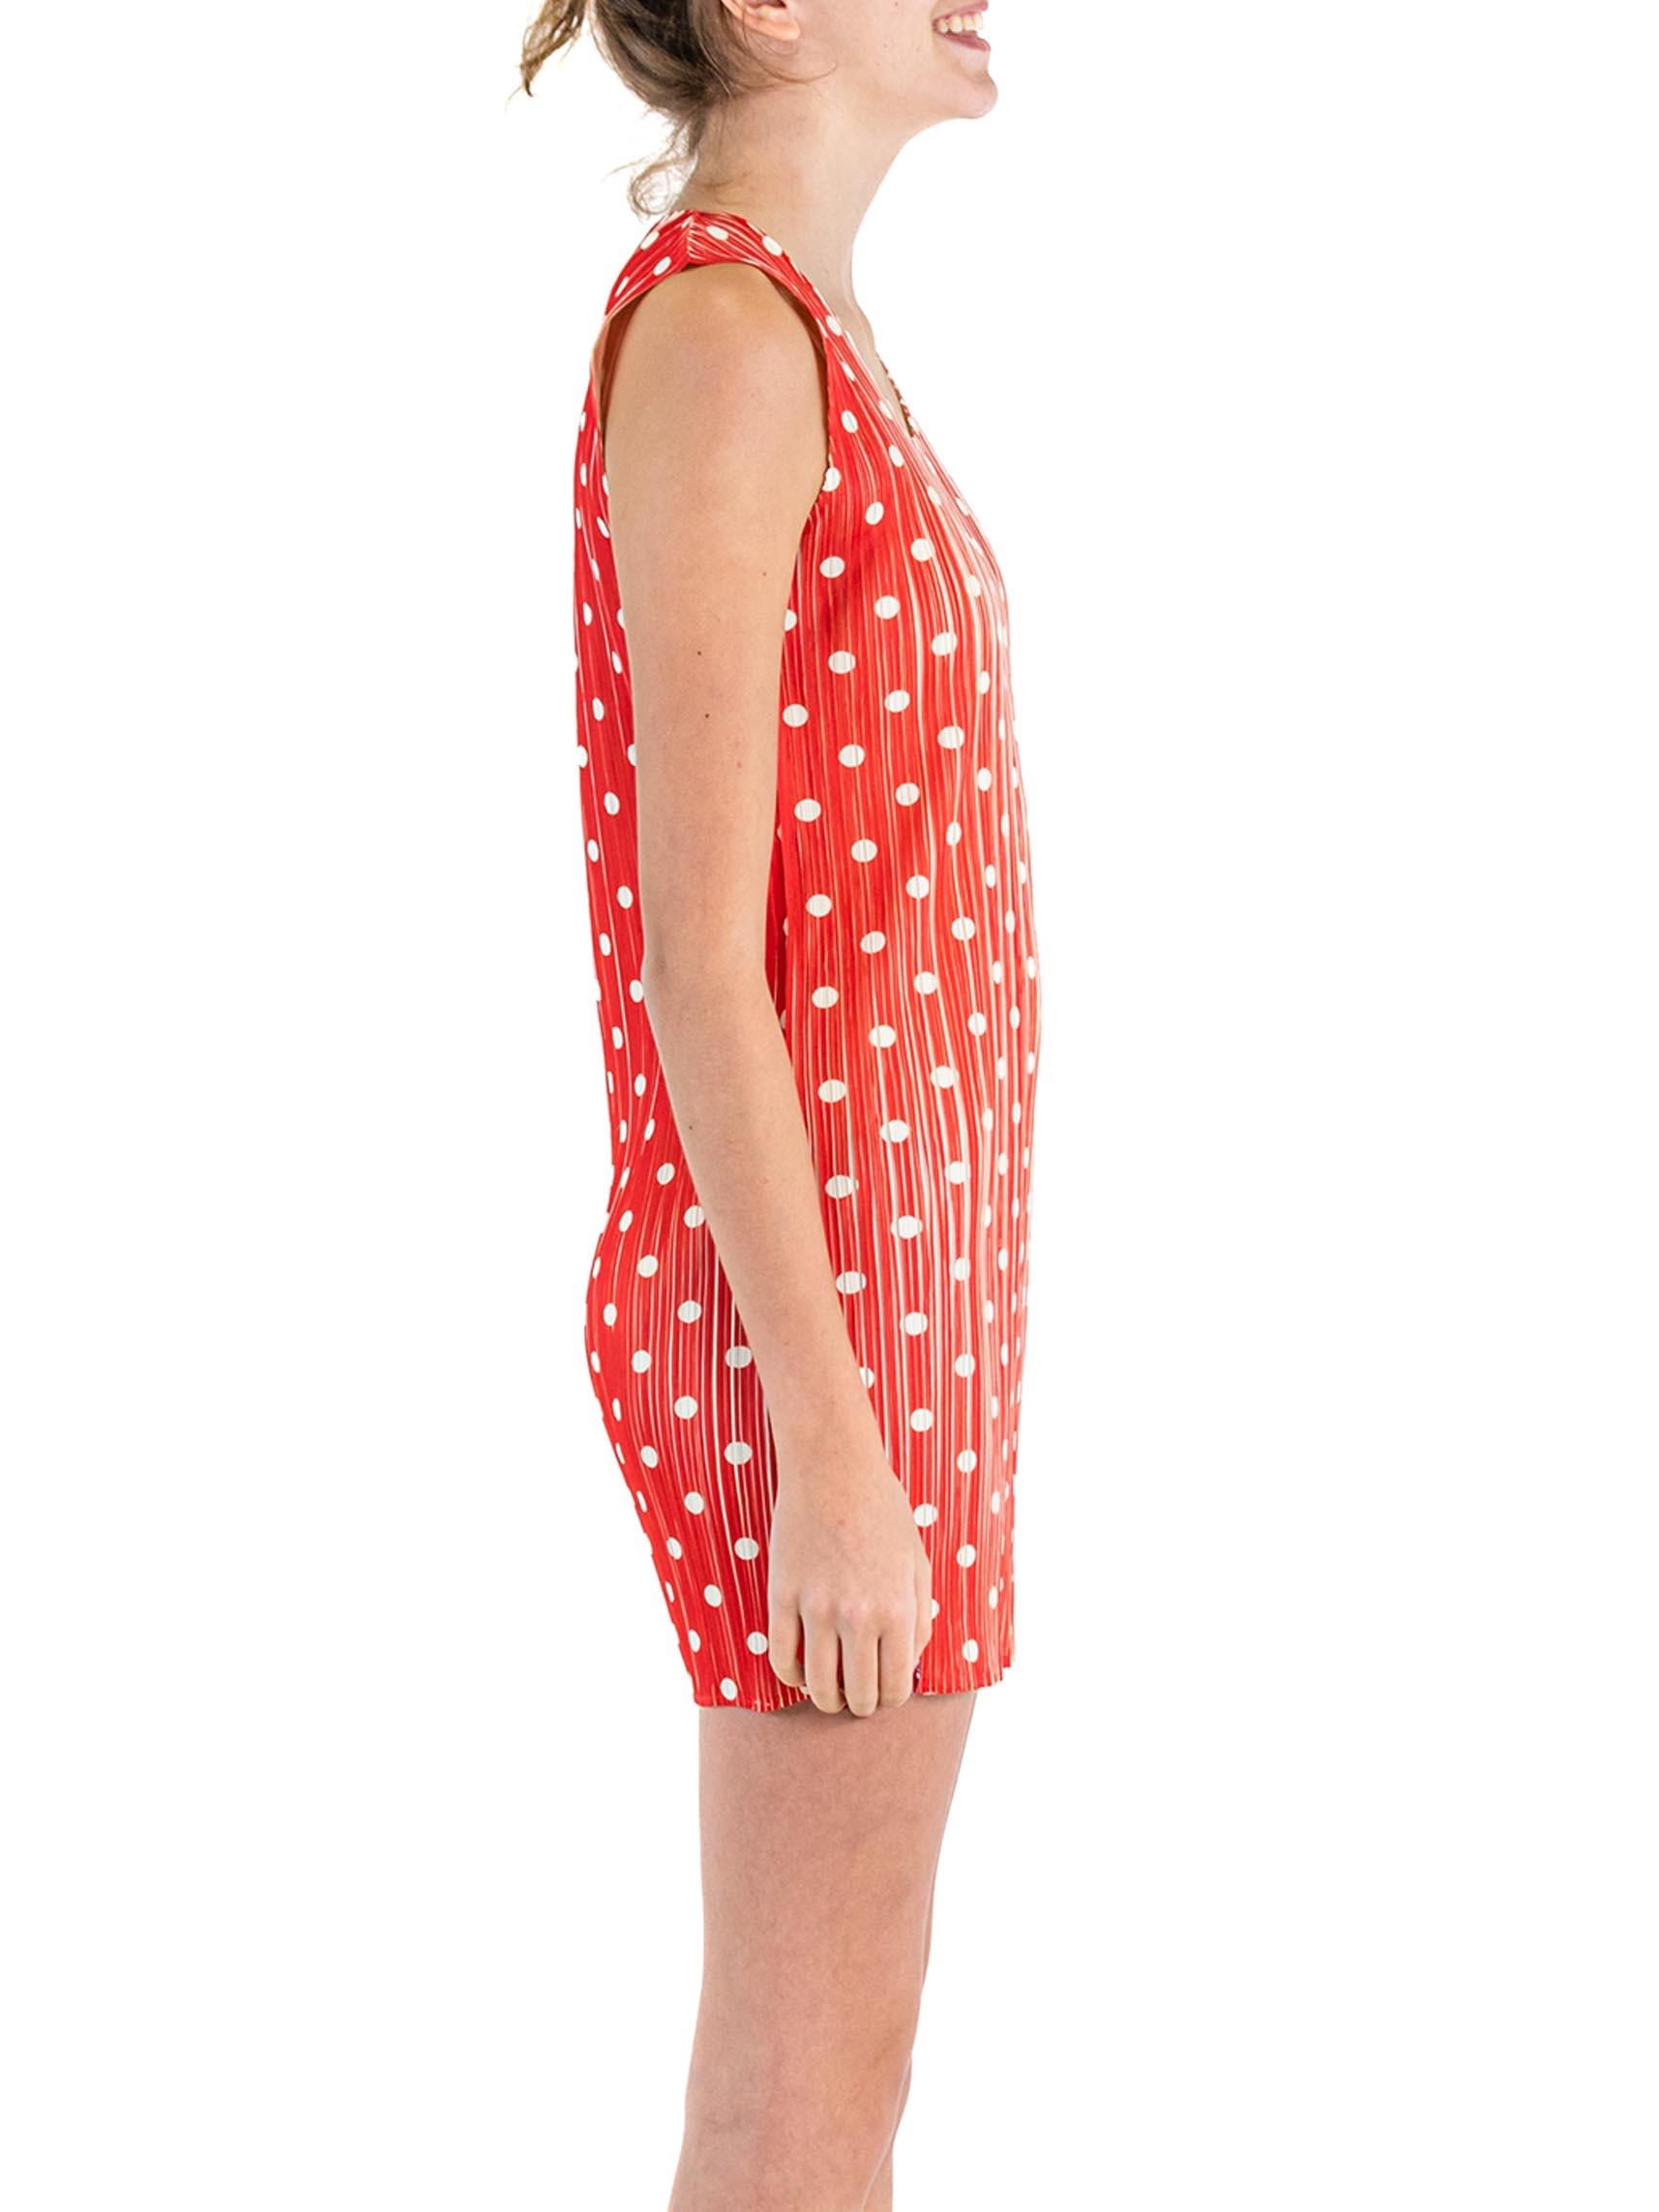 Women's 1990S PLEATS PLEASE ISSEY MIYAKE Red & White Pleated Polyester Polka Dot Dress For Sale